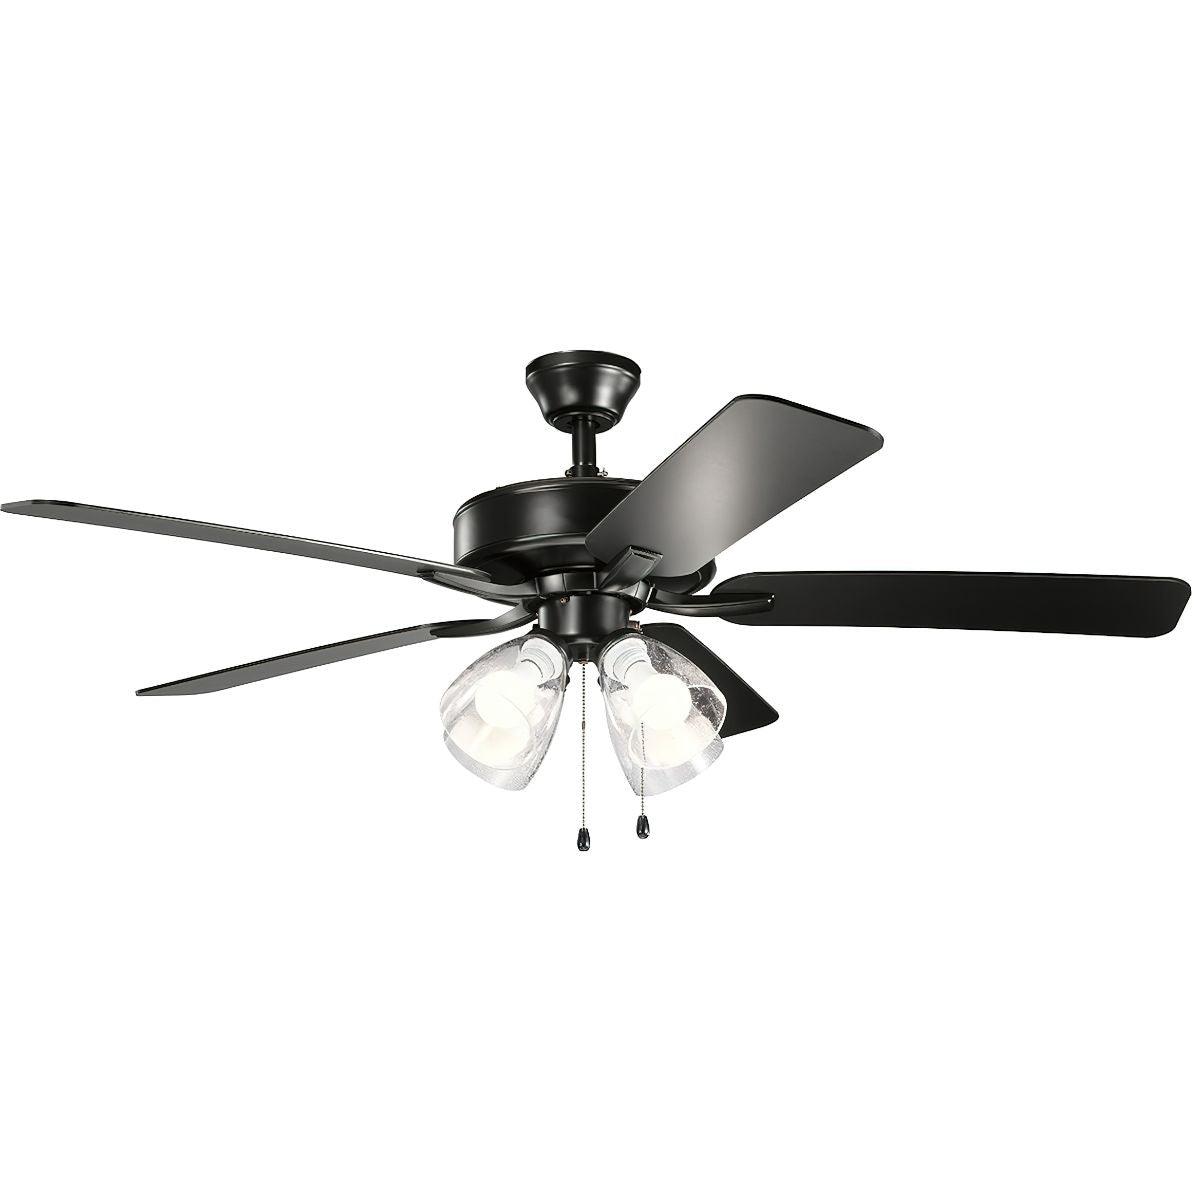 Basics Pro 52 Inch Ceiling Fan With Light, Clear Glass, Pull Chain Included - Bees Lighting